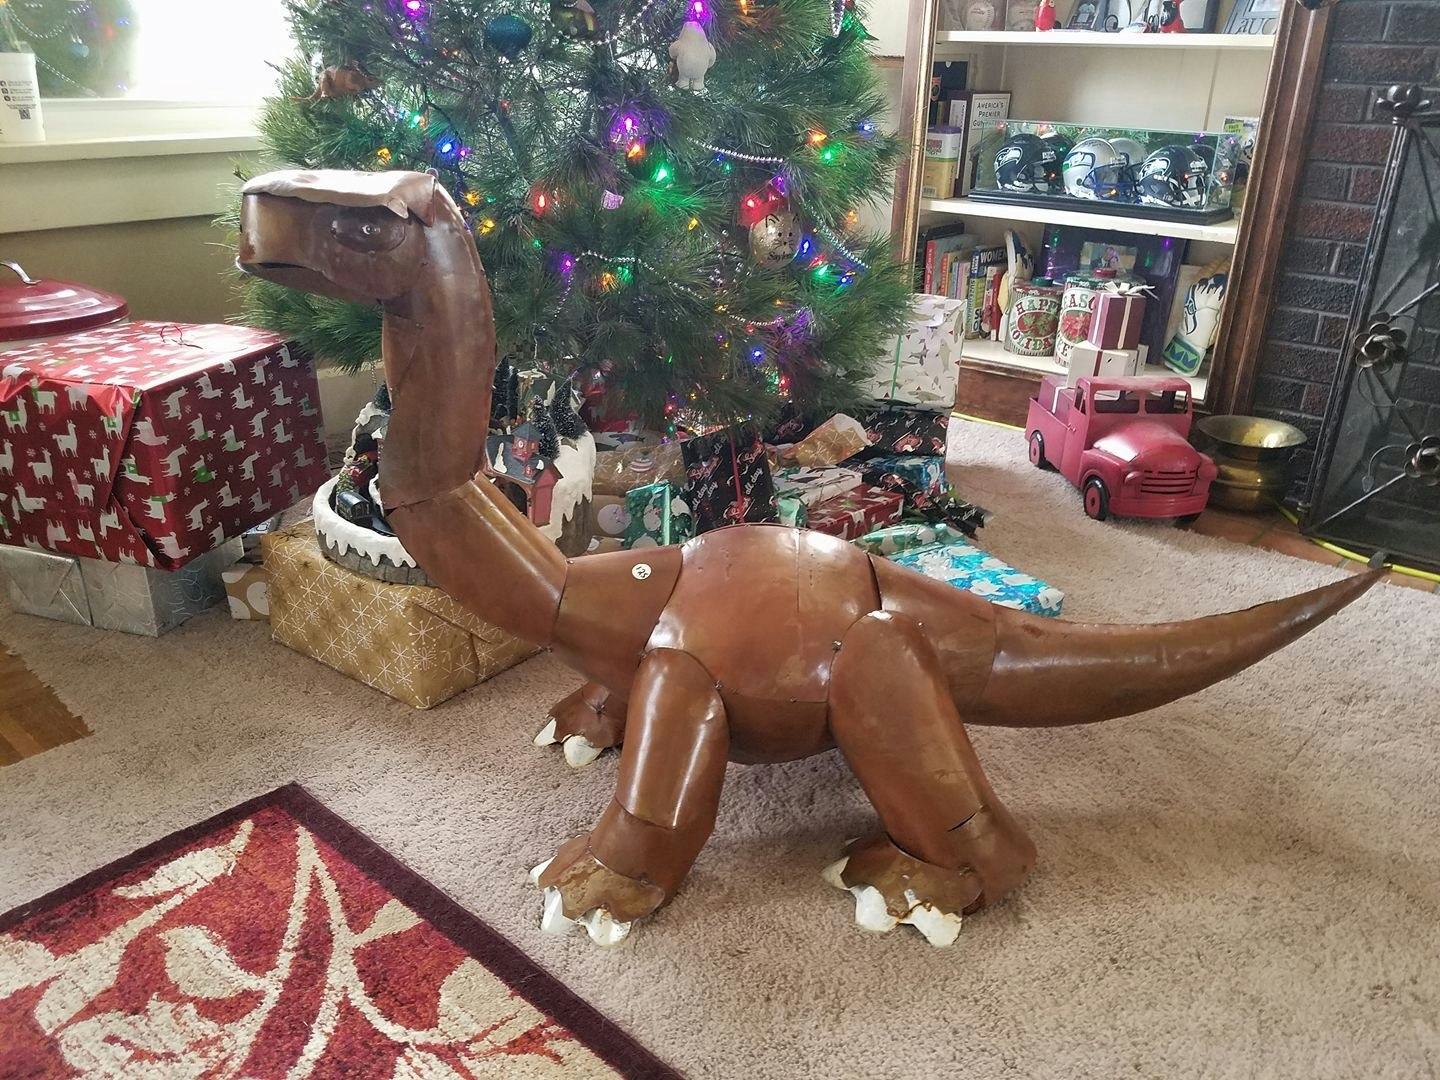 Dino, a small brontosaurus sculpture, was stolen from a Cheyenne family's yard last week.